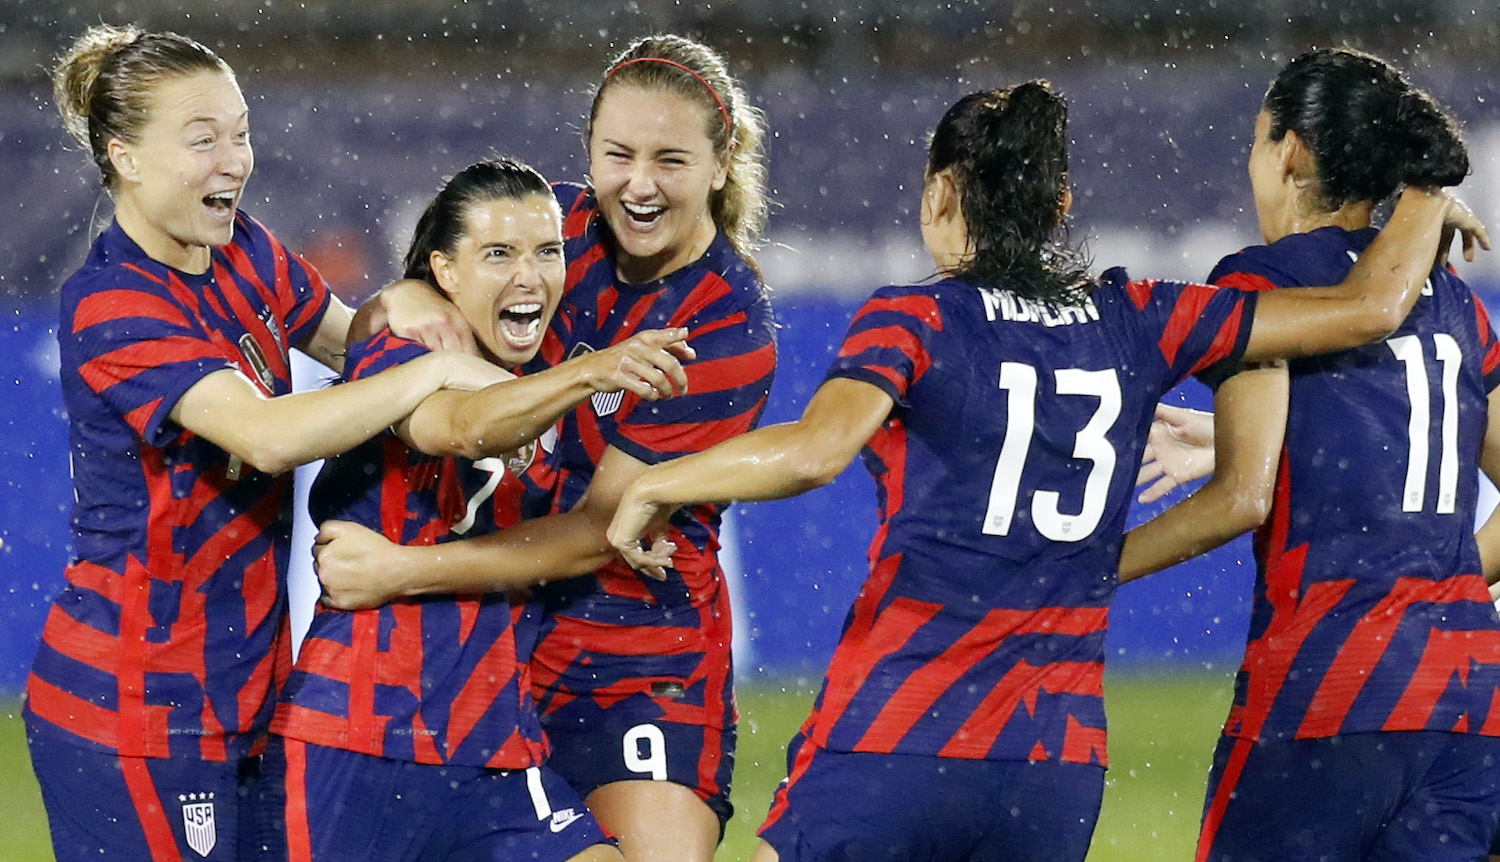 EAST HARTFORD, CONNECTICUT - JULY 01: Tobin Heath #7 of United States celebrates with Christen Press #11, Alex Morgan #13, Lindsey Horan #9 and Emily Sonnett, #14 after scoring a goal against Mexico at Rentschler Field on July 01, 2021 in East Hartford, Connecticut. (Photo by Maddie Meyer/Getty Images)